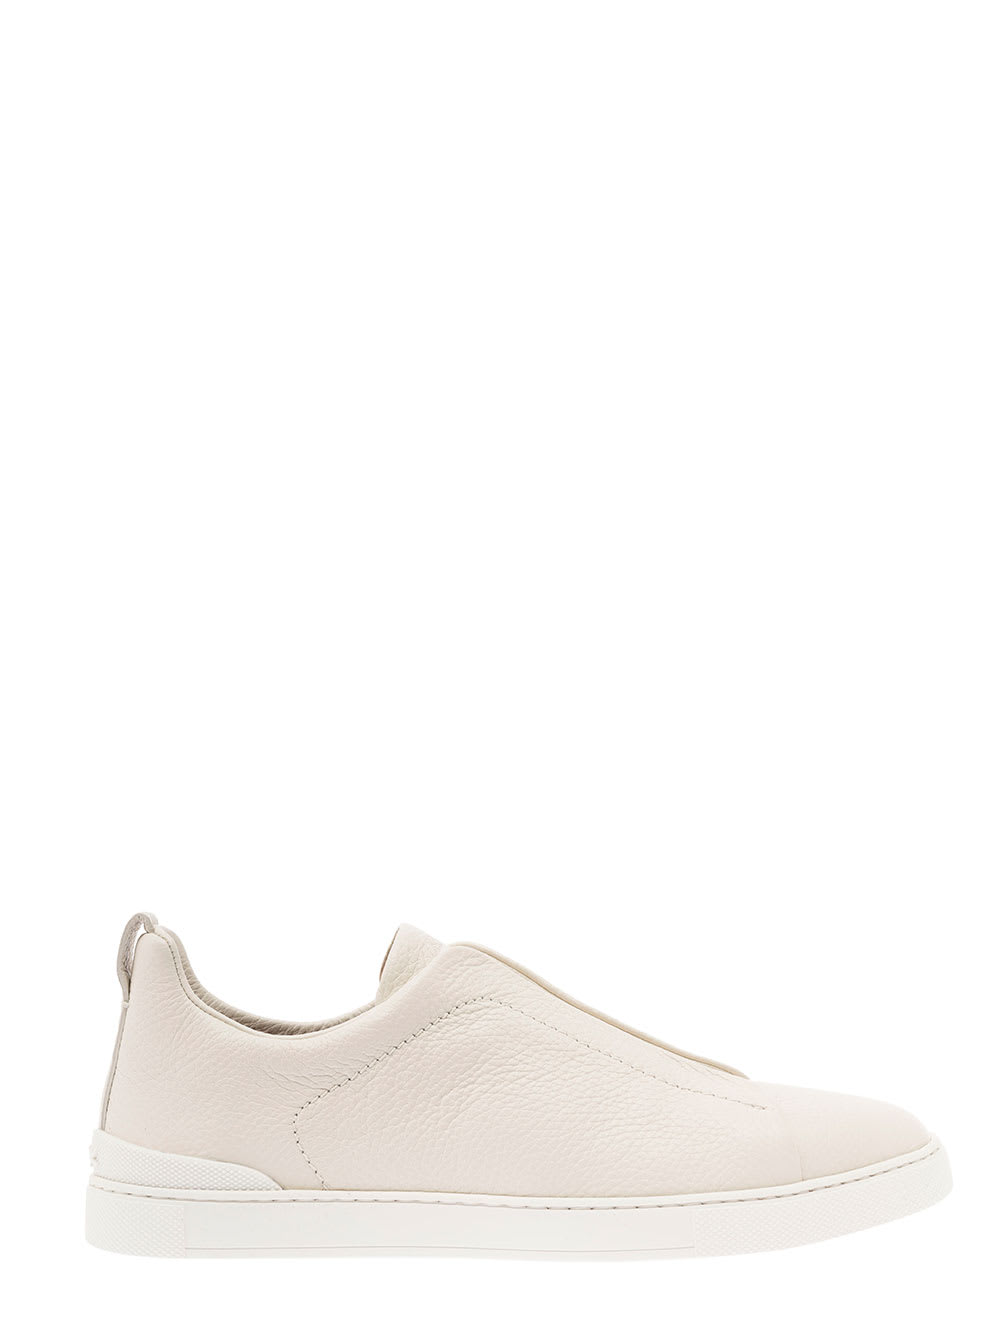 Z Zegna Triple Stitch Sneakers Without Laces In White Leather Man Z Zegna